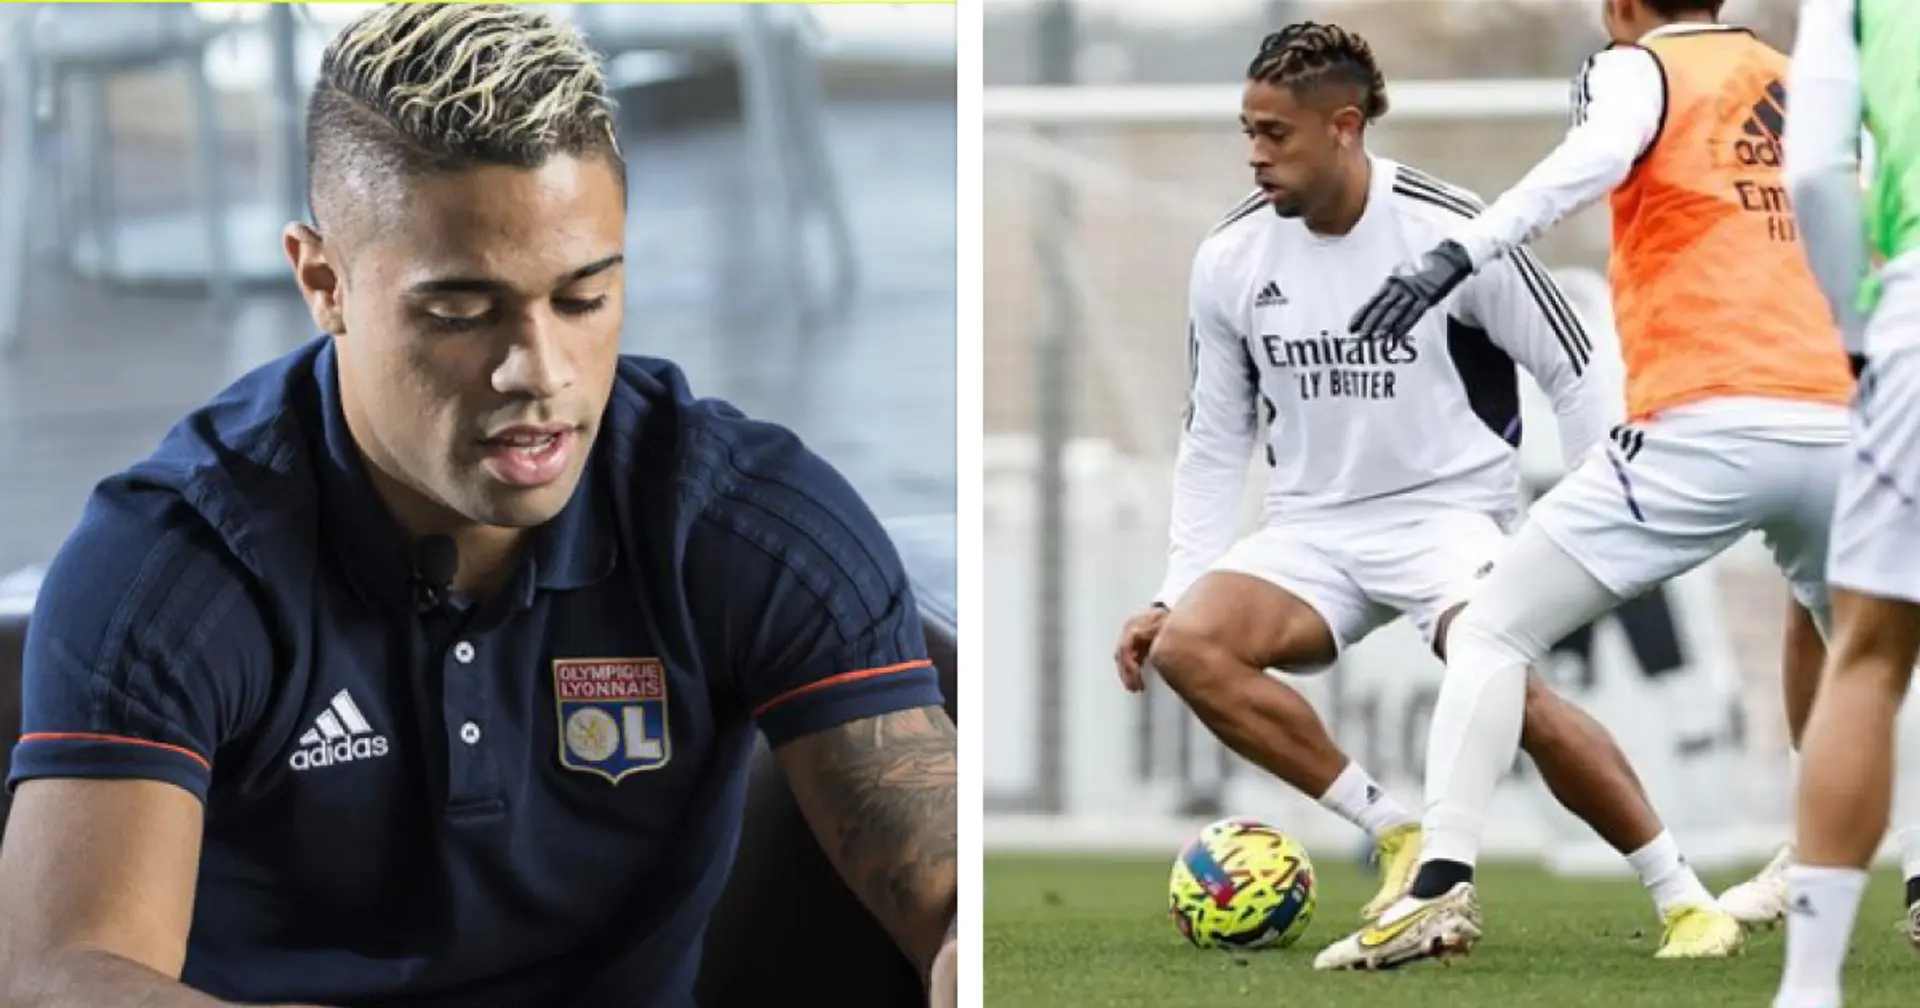 Mariano shares picture of his swollen foot after training